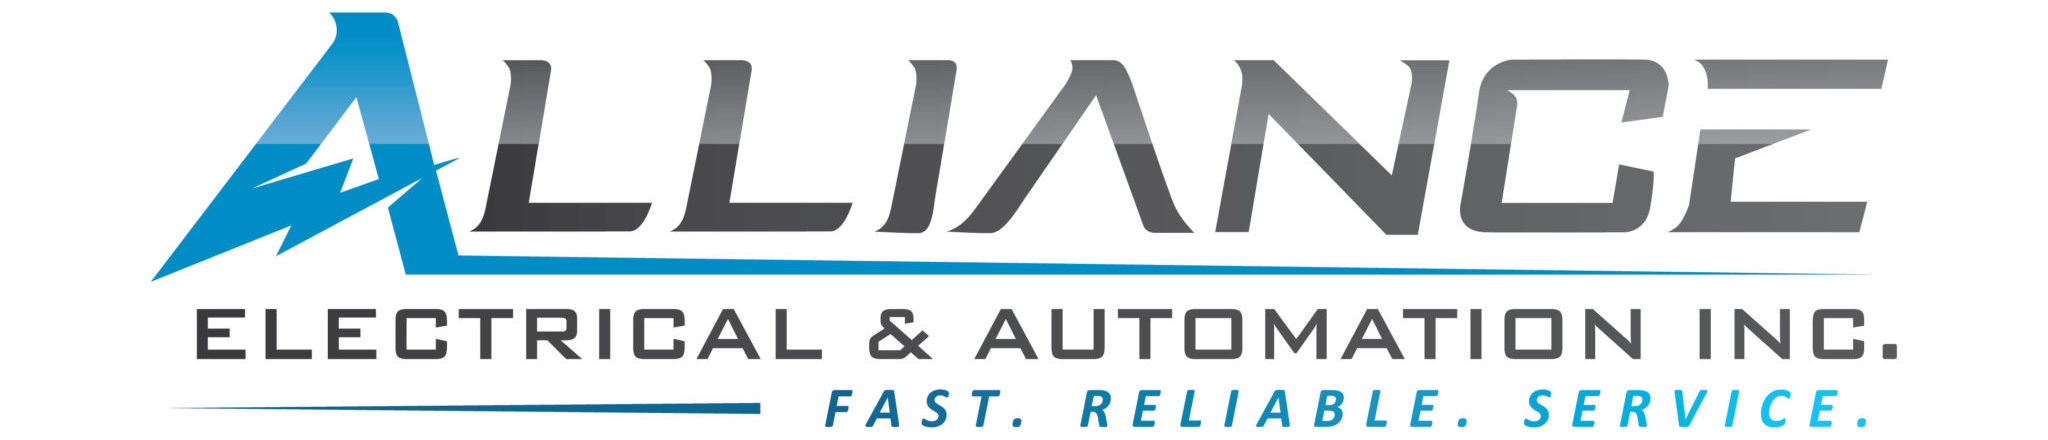 Alliance Electrical & Automation Inc.